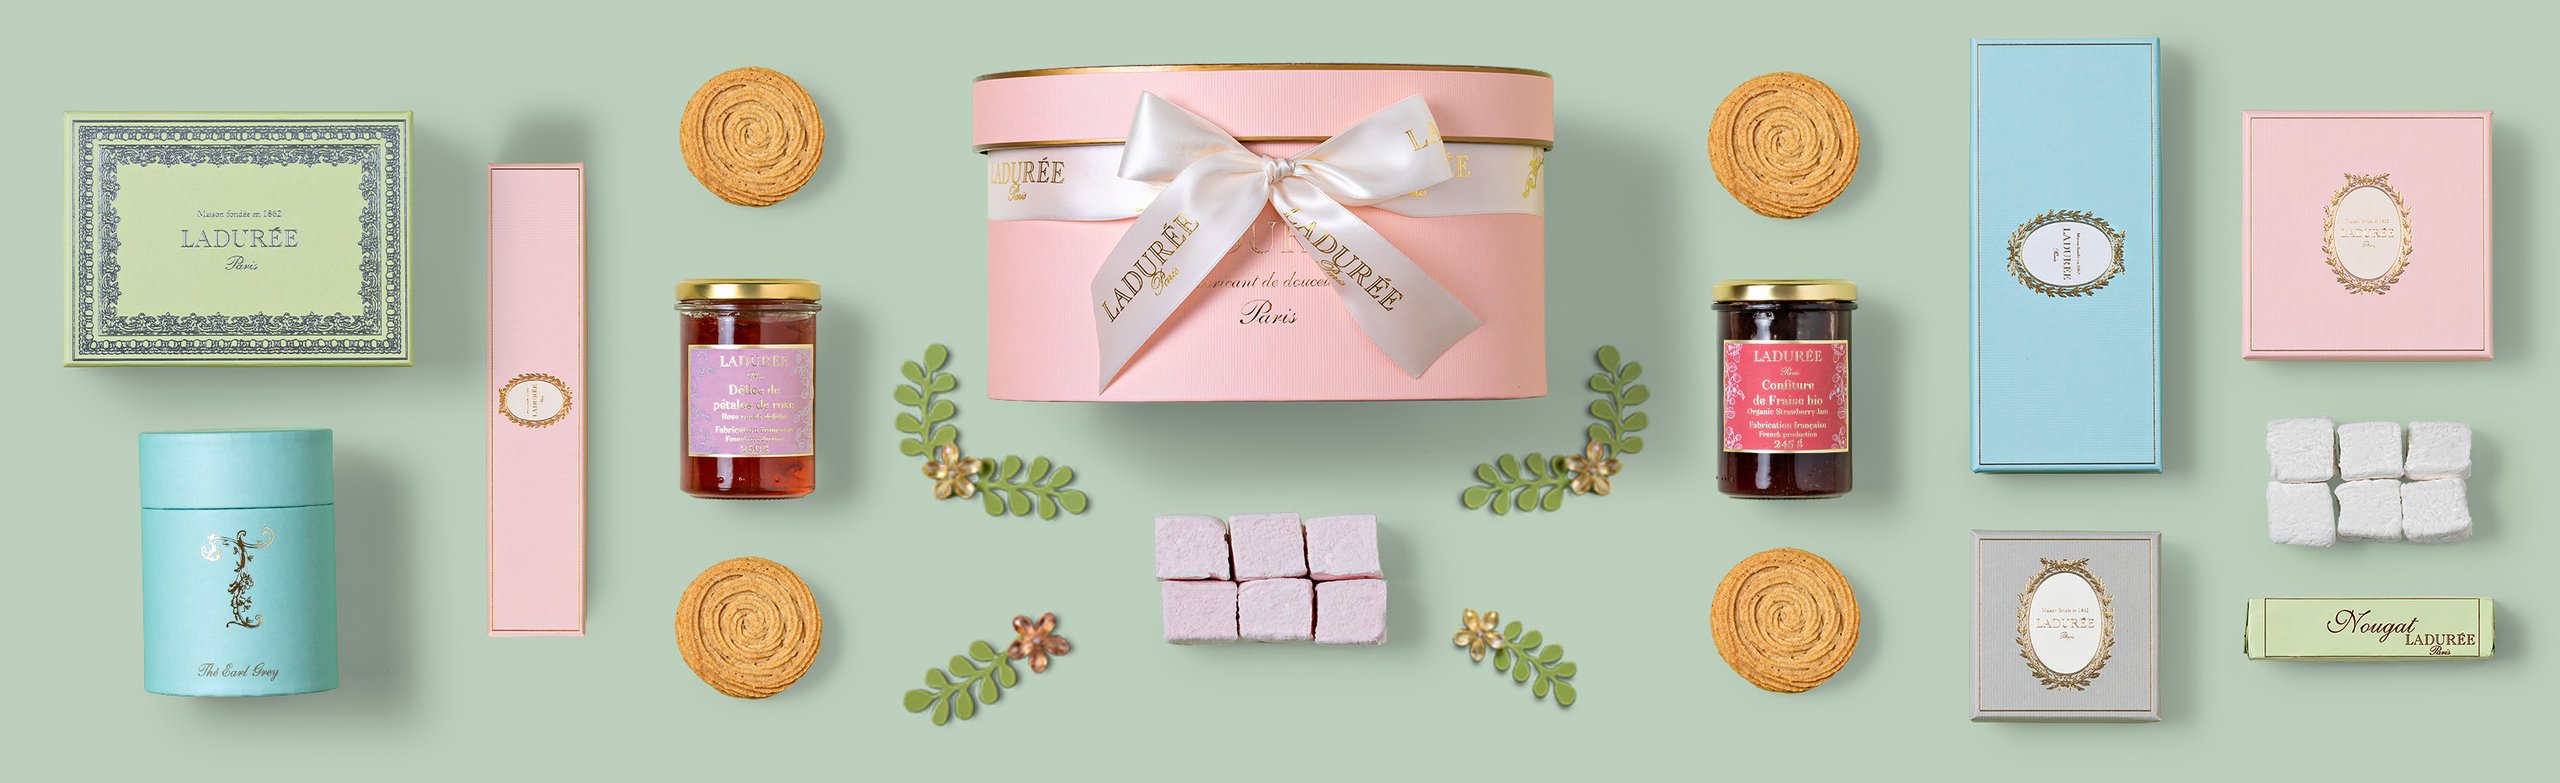 Gourmet gift boxes